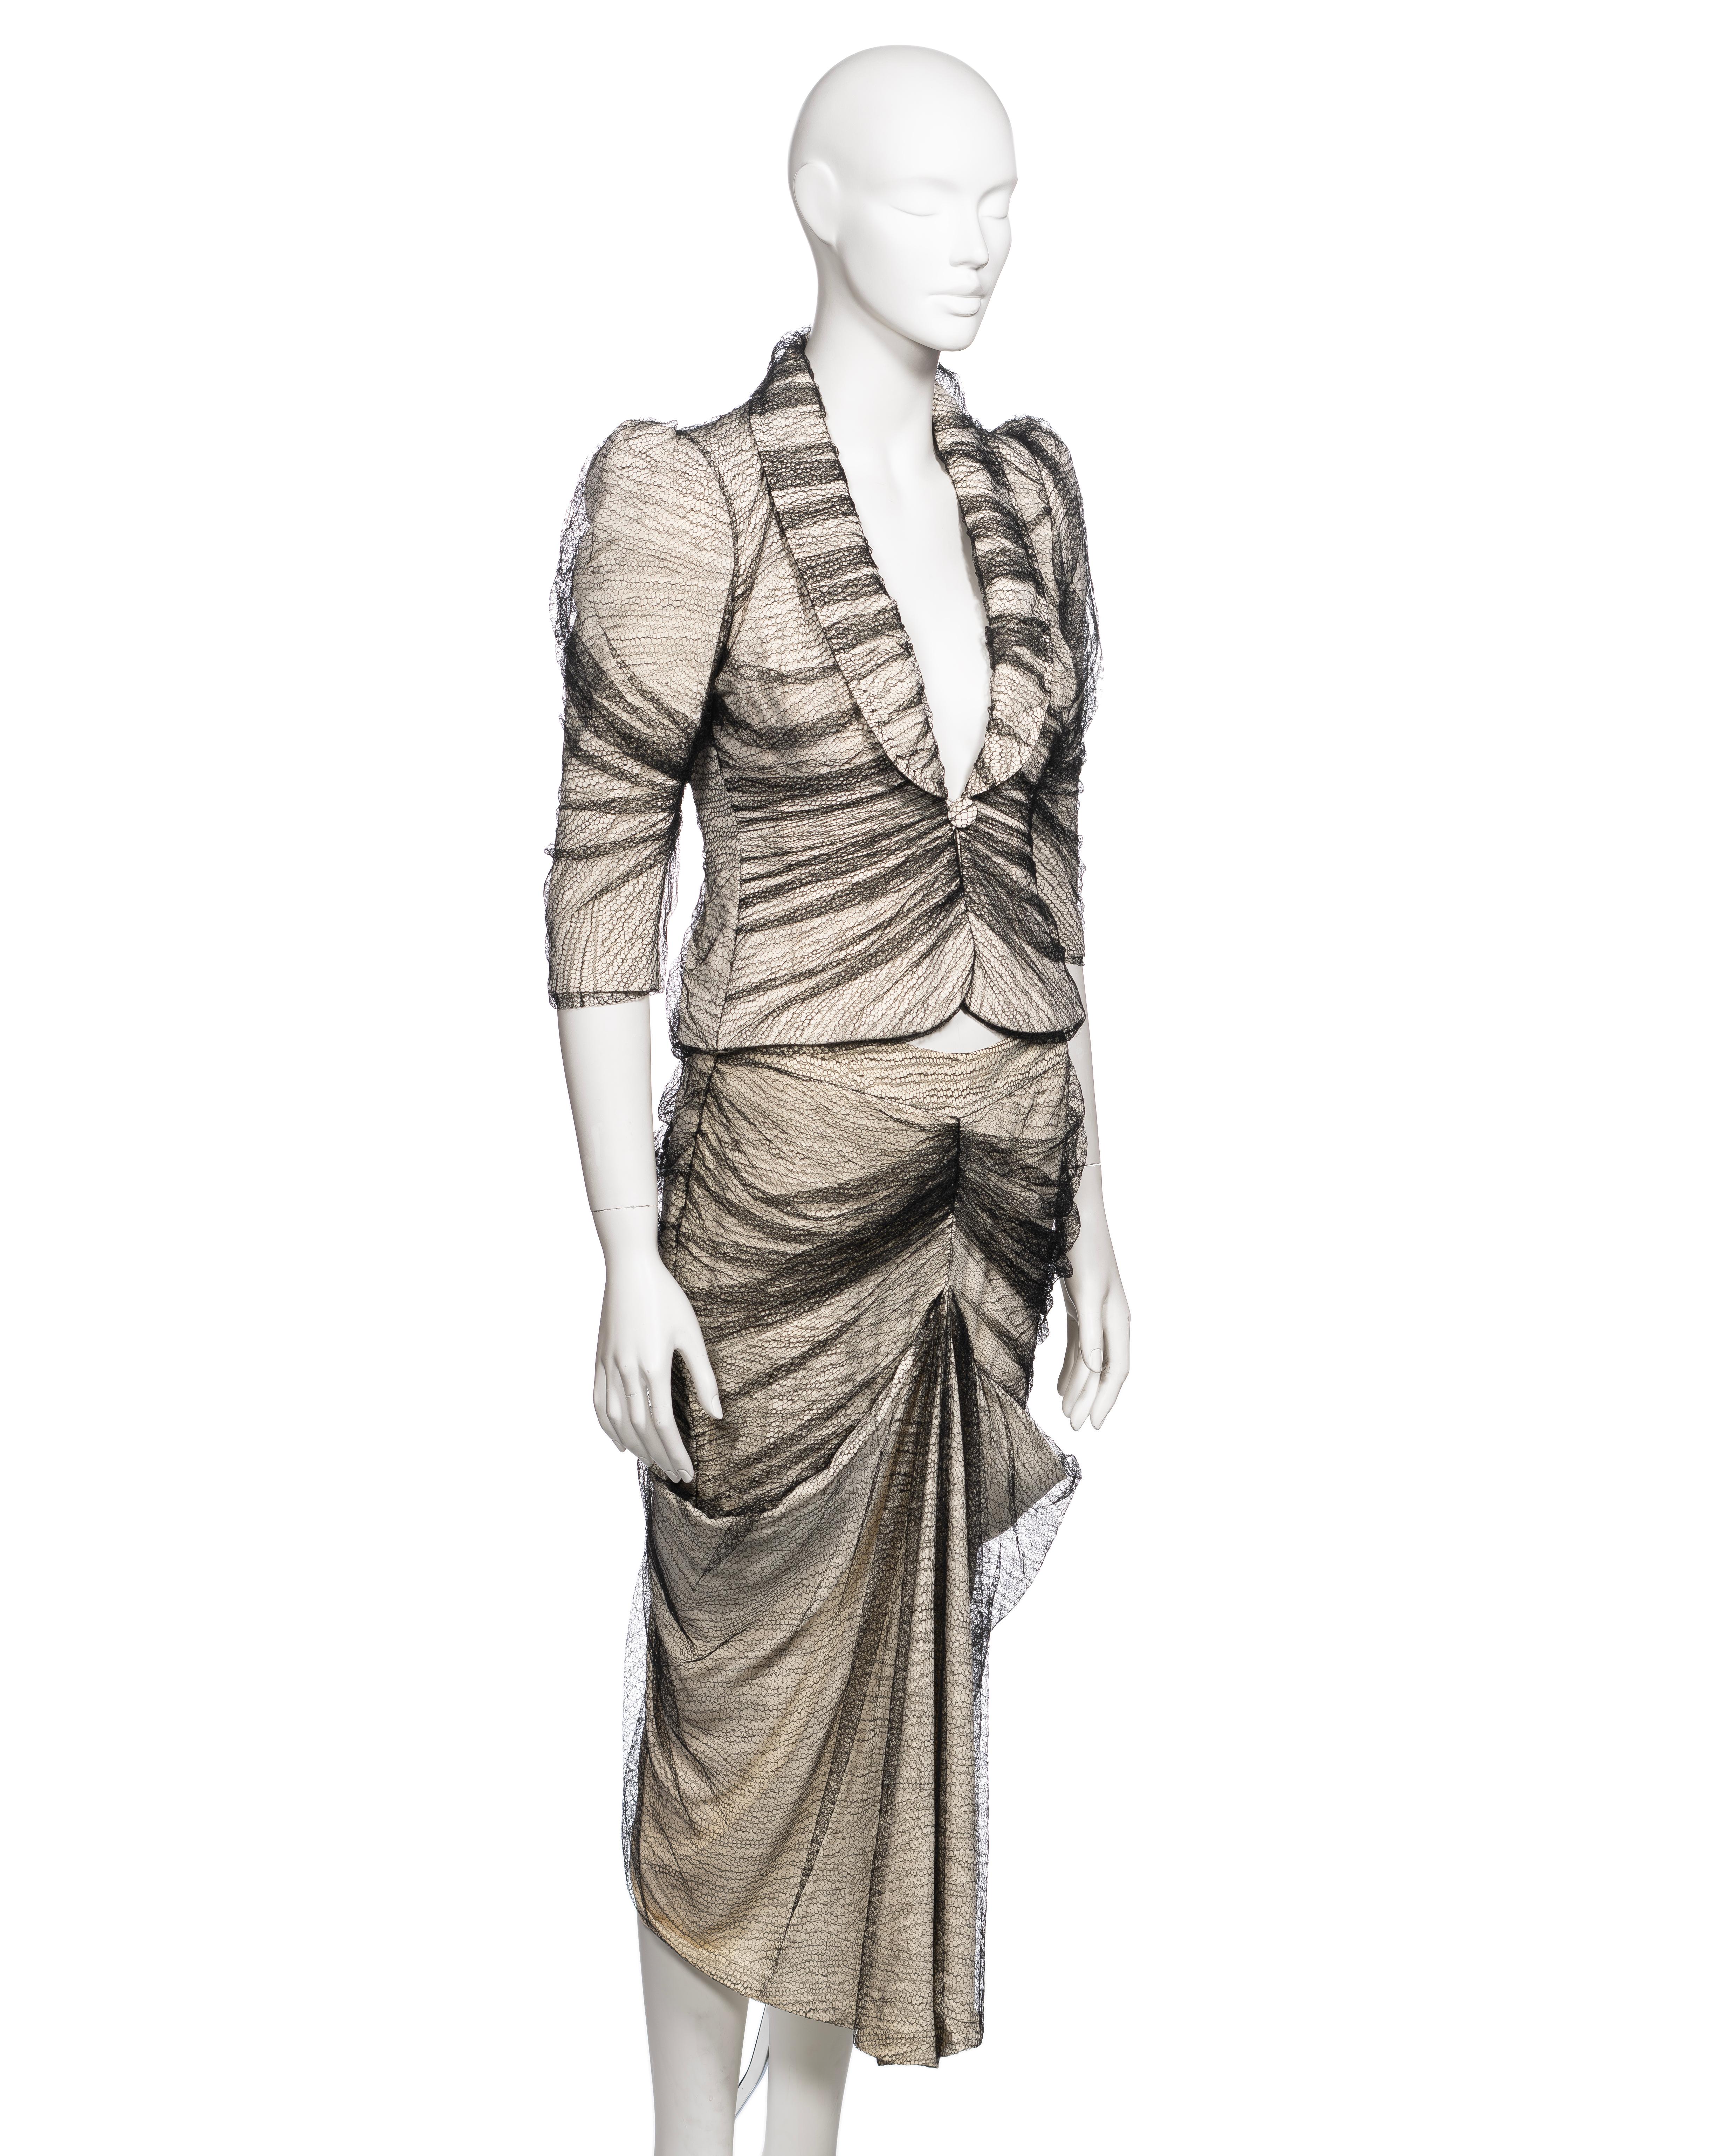 Alexander McQueen 'Sarabande' Ivory Skirt Suit with Black Lace Overlay, SS 2007 For Sale 3